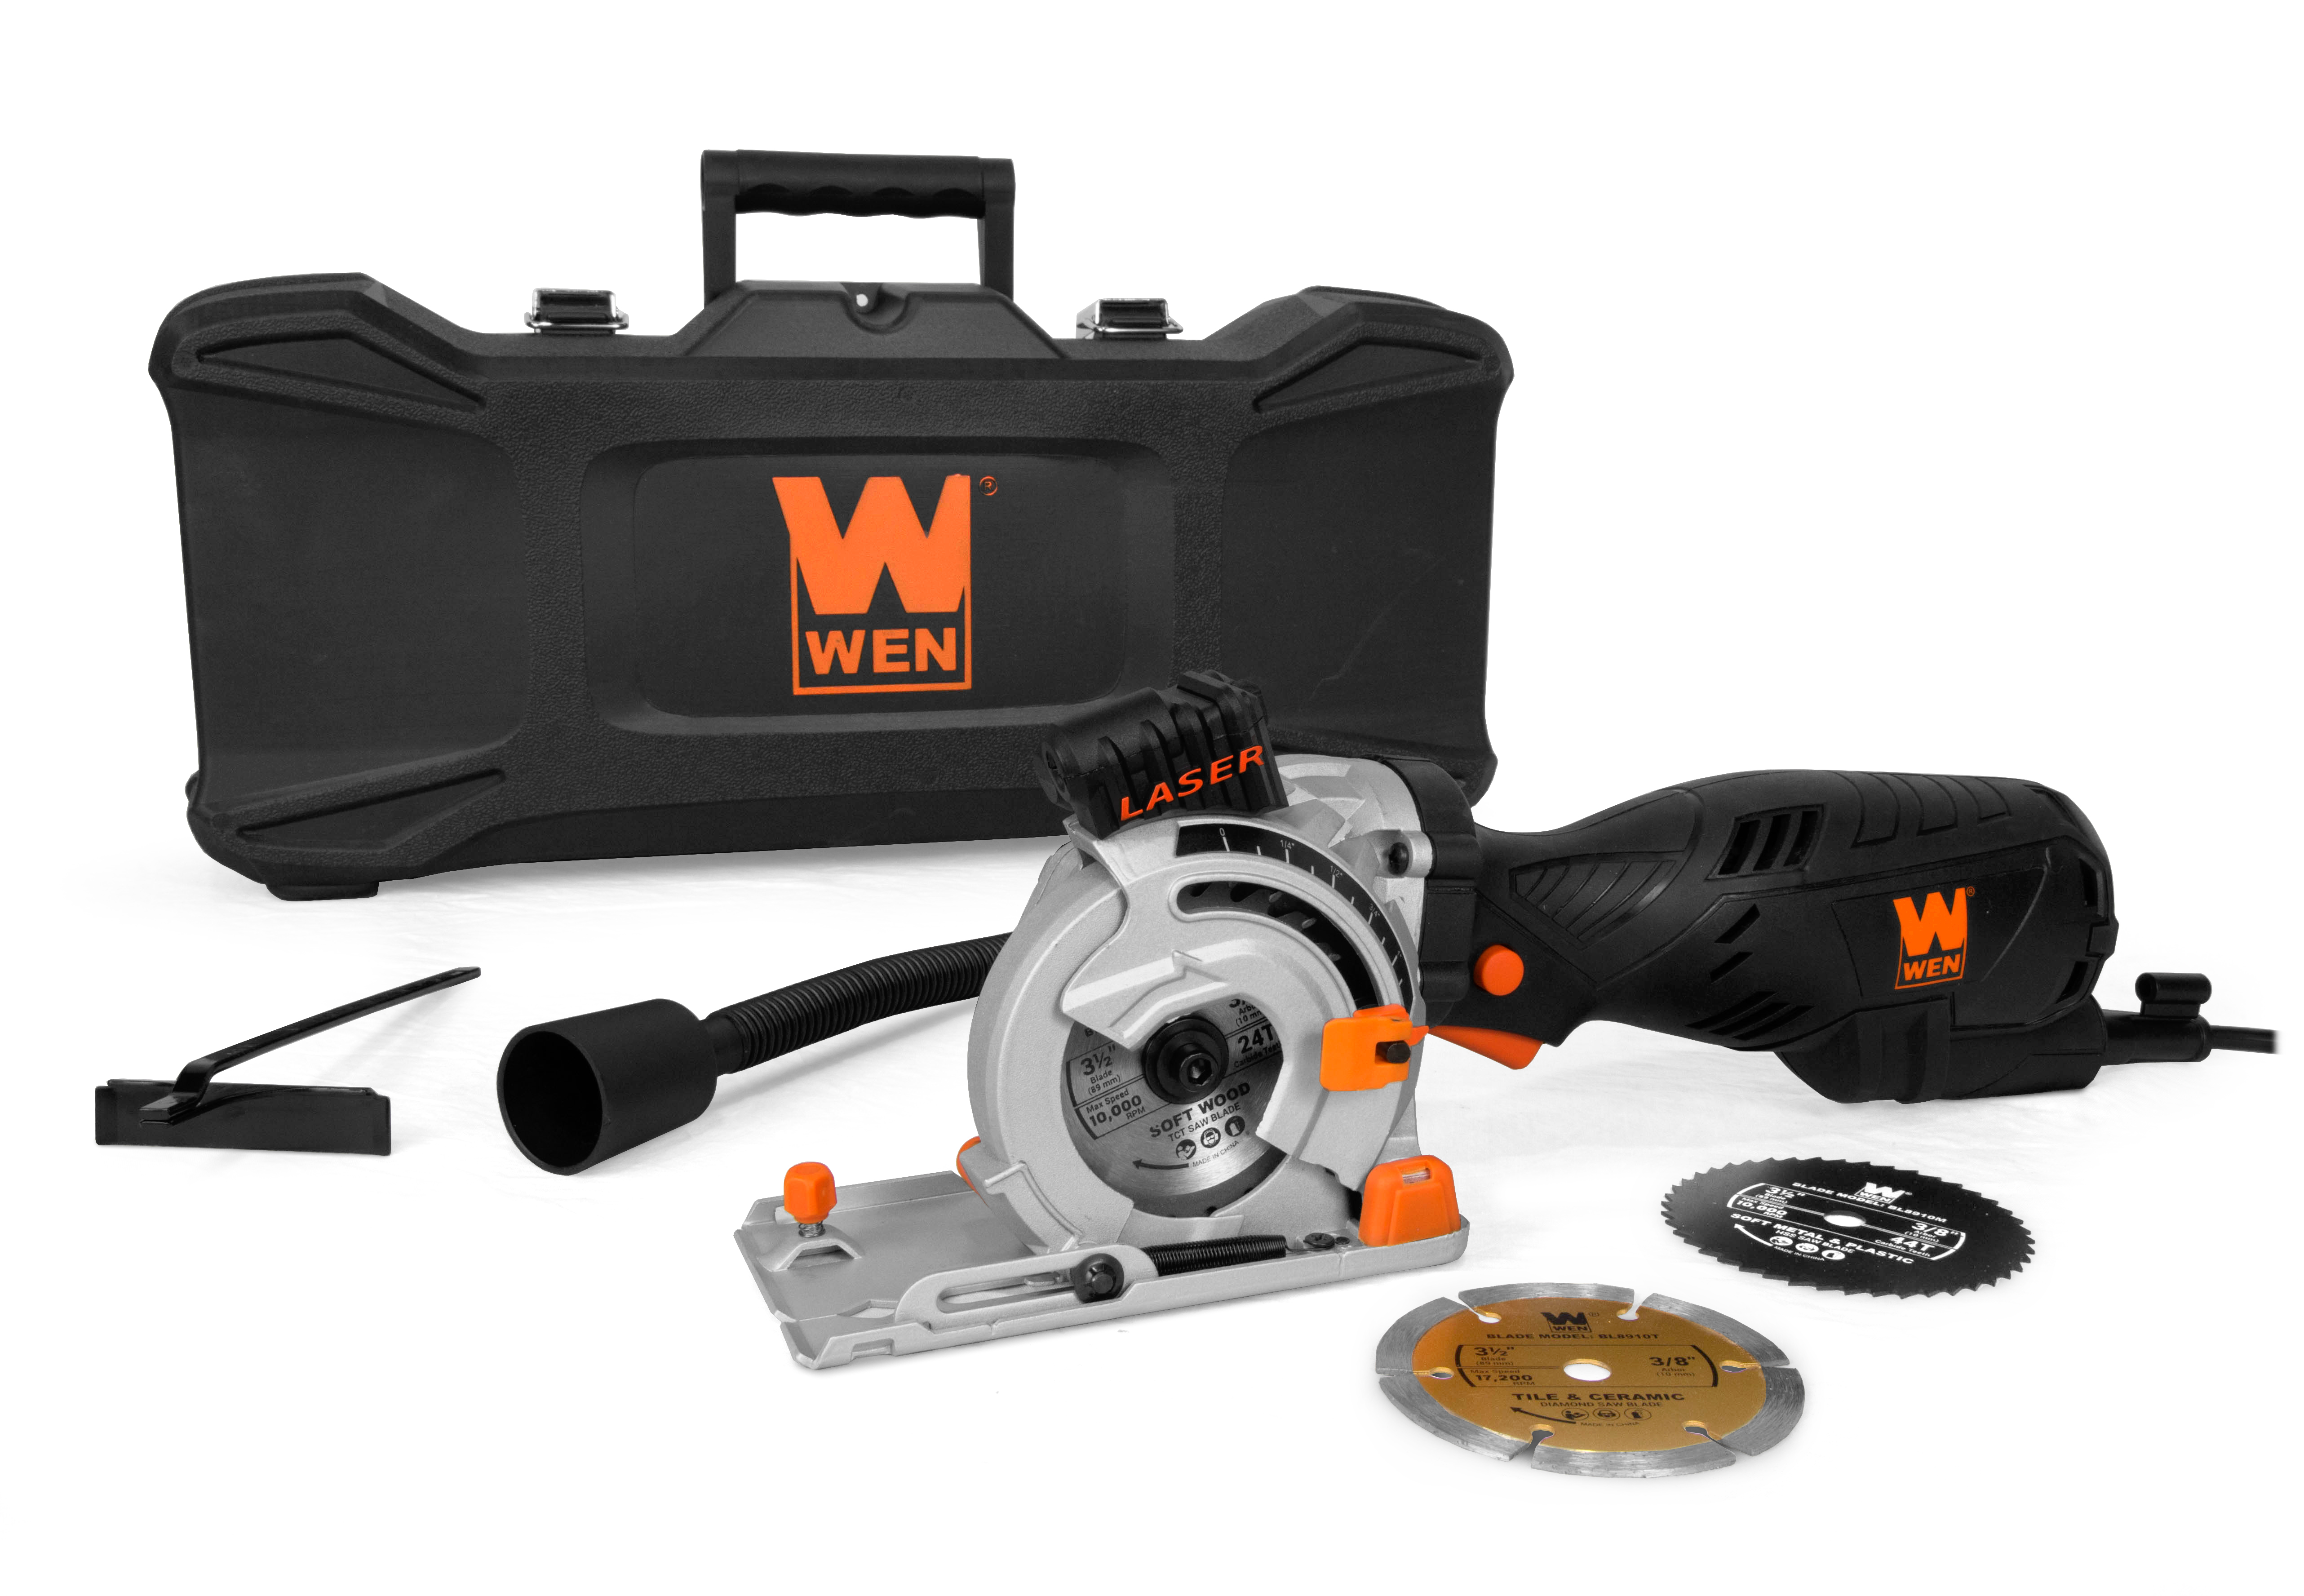 WEN 3620 5-Amp 3-1/2-Inch Plunge Cut Compact Circular Saw with Laser, Carrying  Case, and Three Blades Walmart Canada